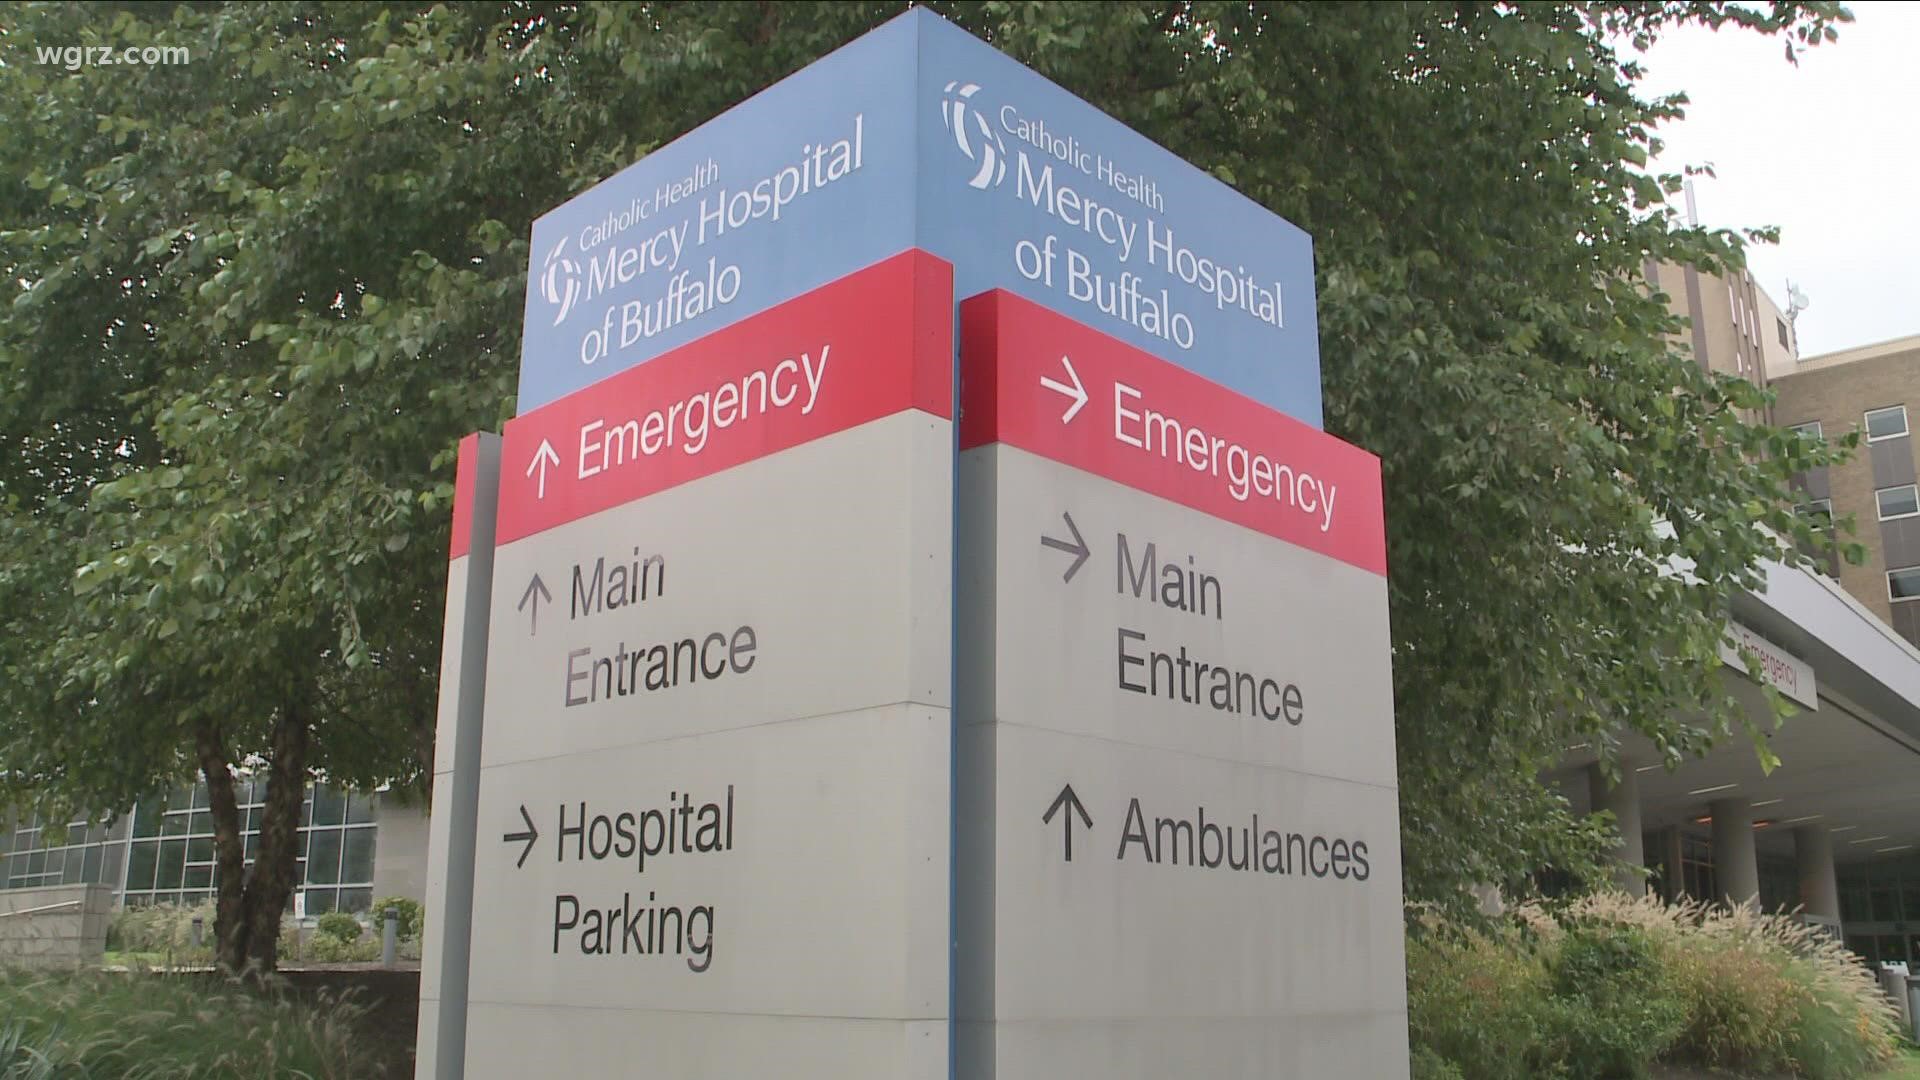 ECMC, Kaleida Health and Catholic Health are expected to hear from the state on Monday on whether they need to pause non-essential surgeries.